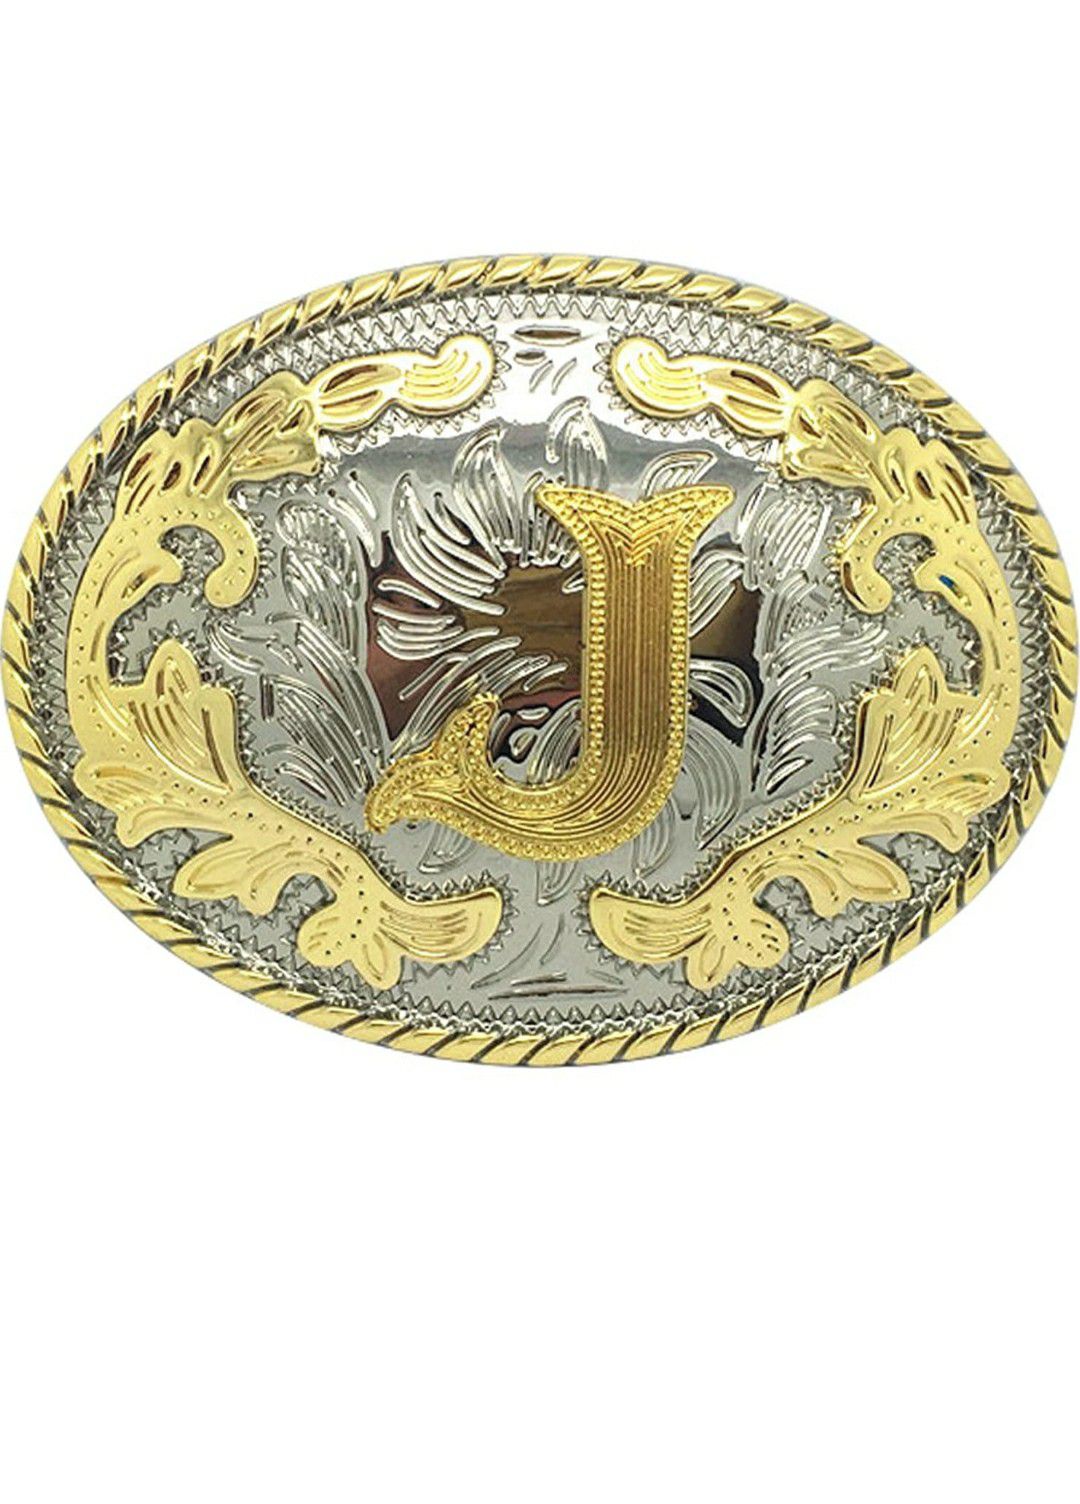 Western Belt Buckle Initial Letters J-Cowboy Rodeo Gold Large Belt Buckle for Men and Women